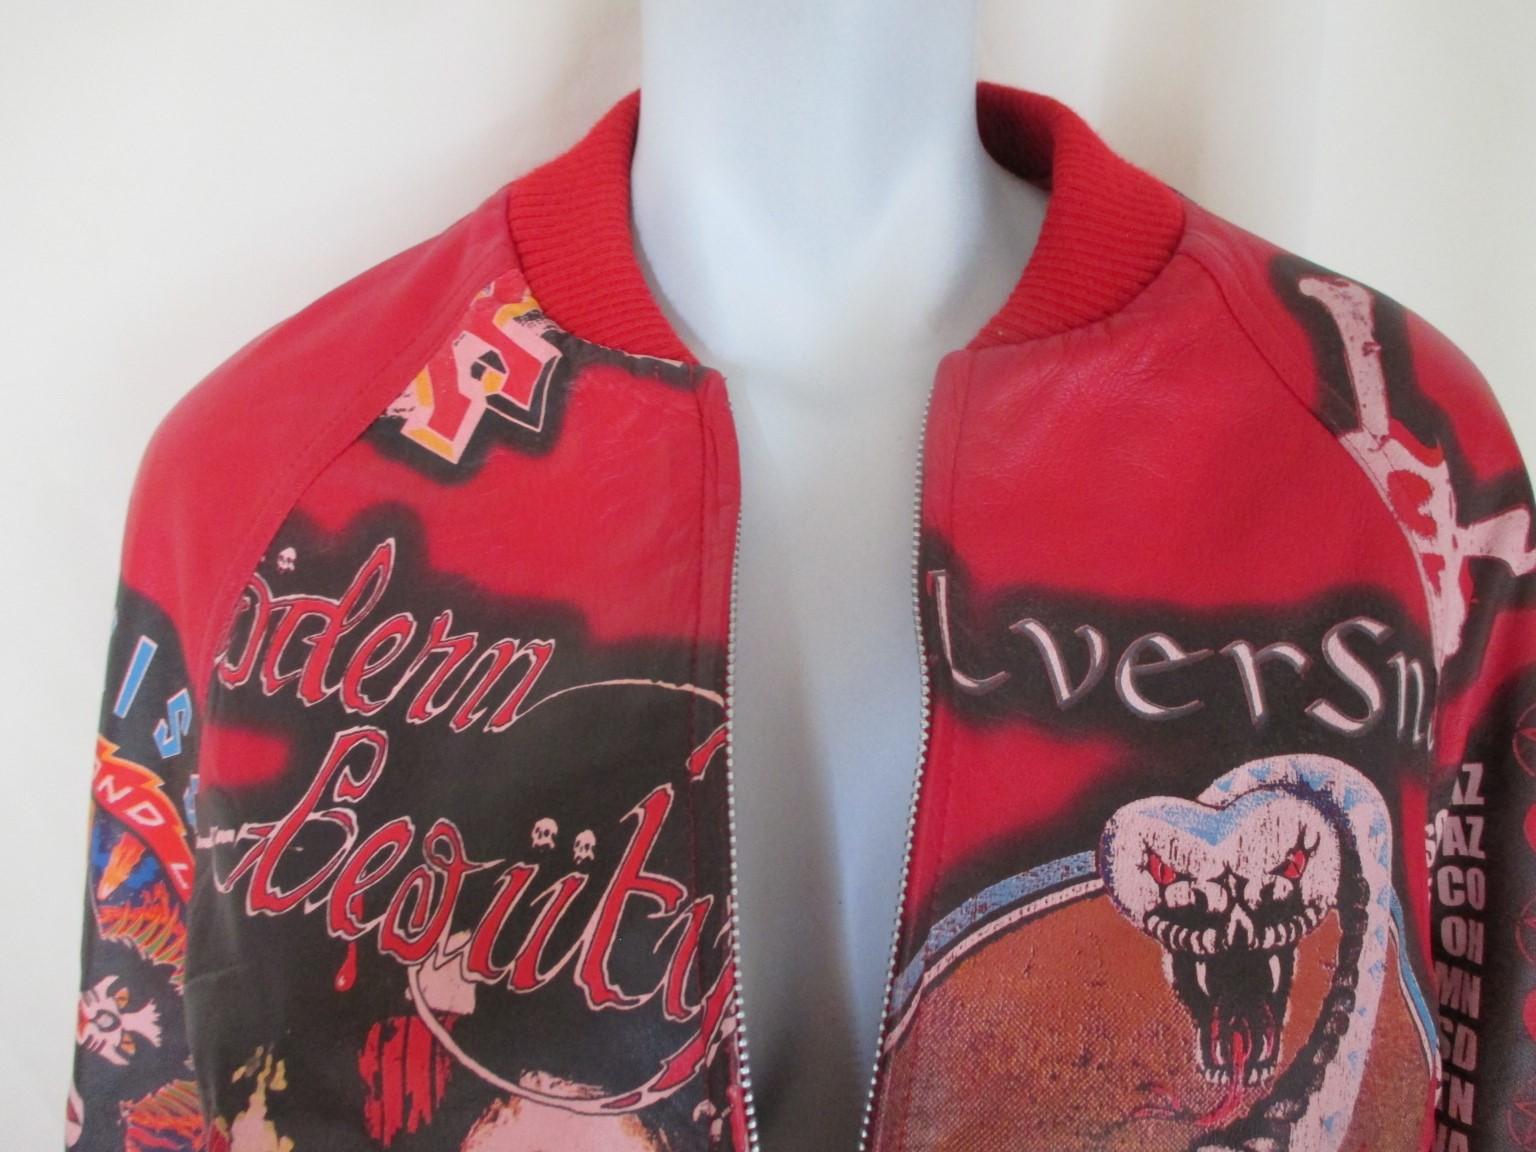 --Collectors-item--
Dolce & Gabbana vintage
Red leather jacket with rock and roll (Kiss) inspired designs.
The jacket has 2 zipper pockets and a zipper closing
Its in good vintage condition with some wear at the leather.
It can be worn by man or